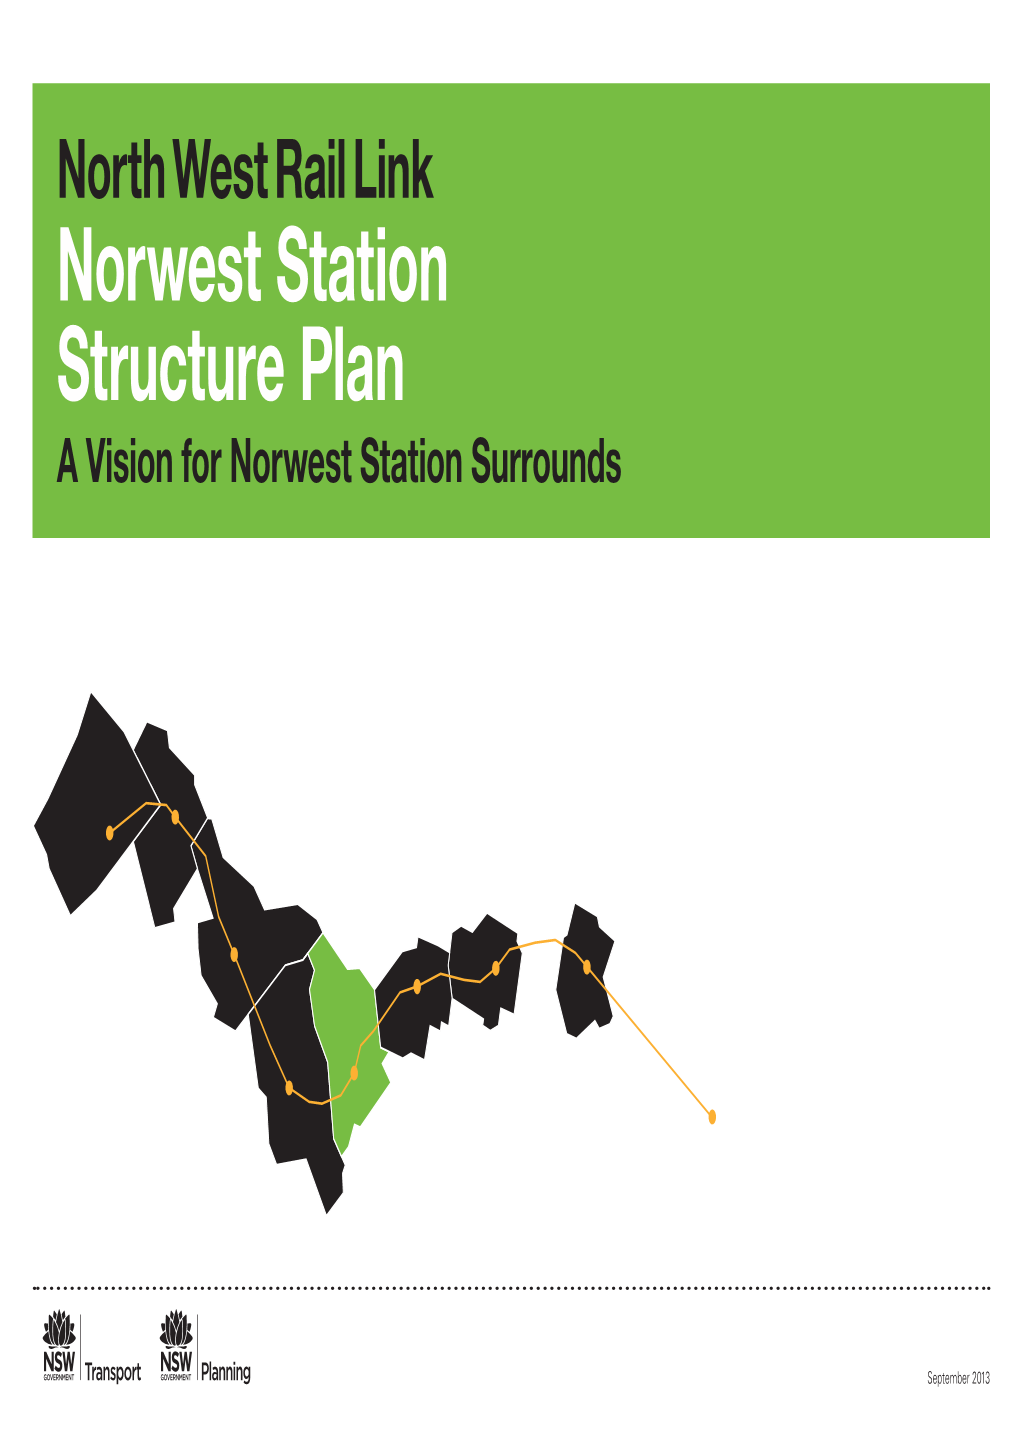 Norwest Station Structure Plan a Vision for Norwest Station Surrounds